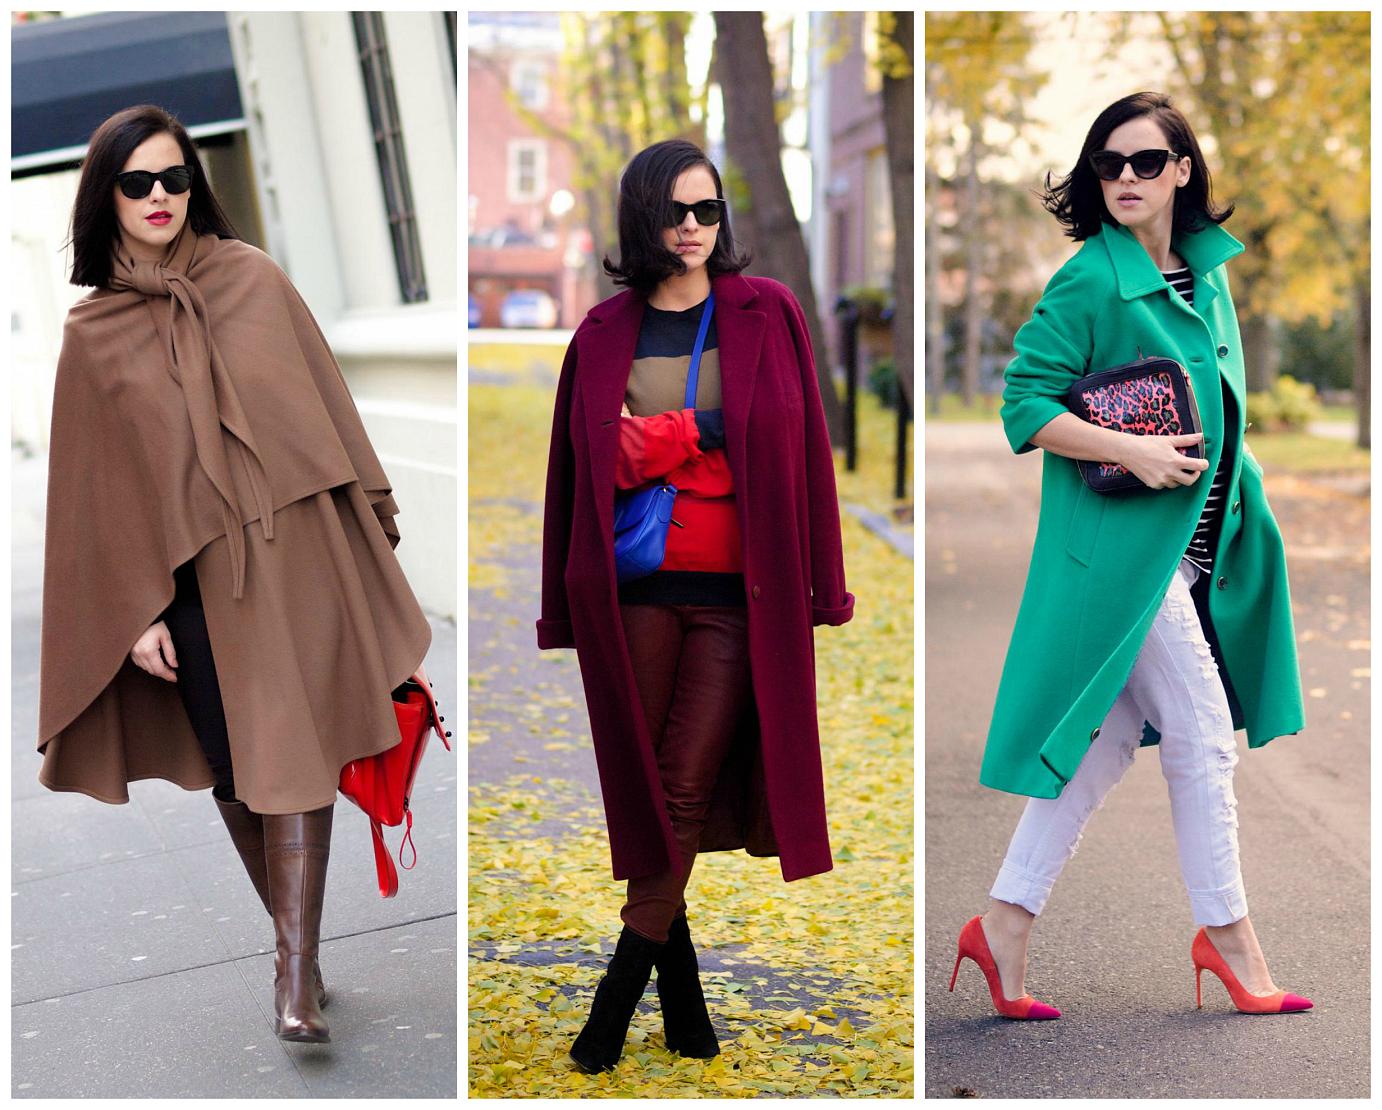 bittersweet colours, 2014 outfits, colorful coats, colorful shoes, street style, fall street style, summer style, 